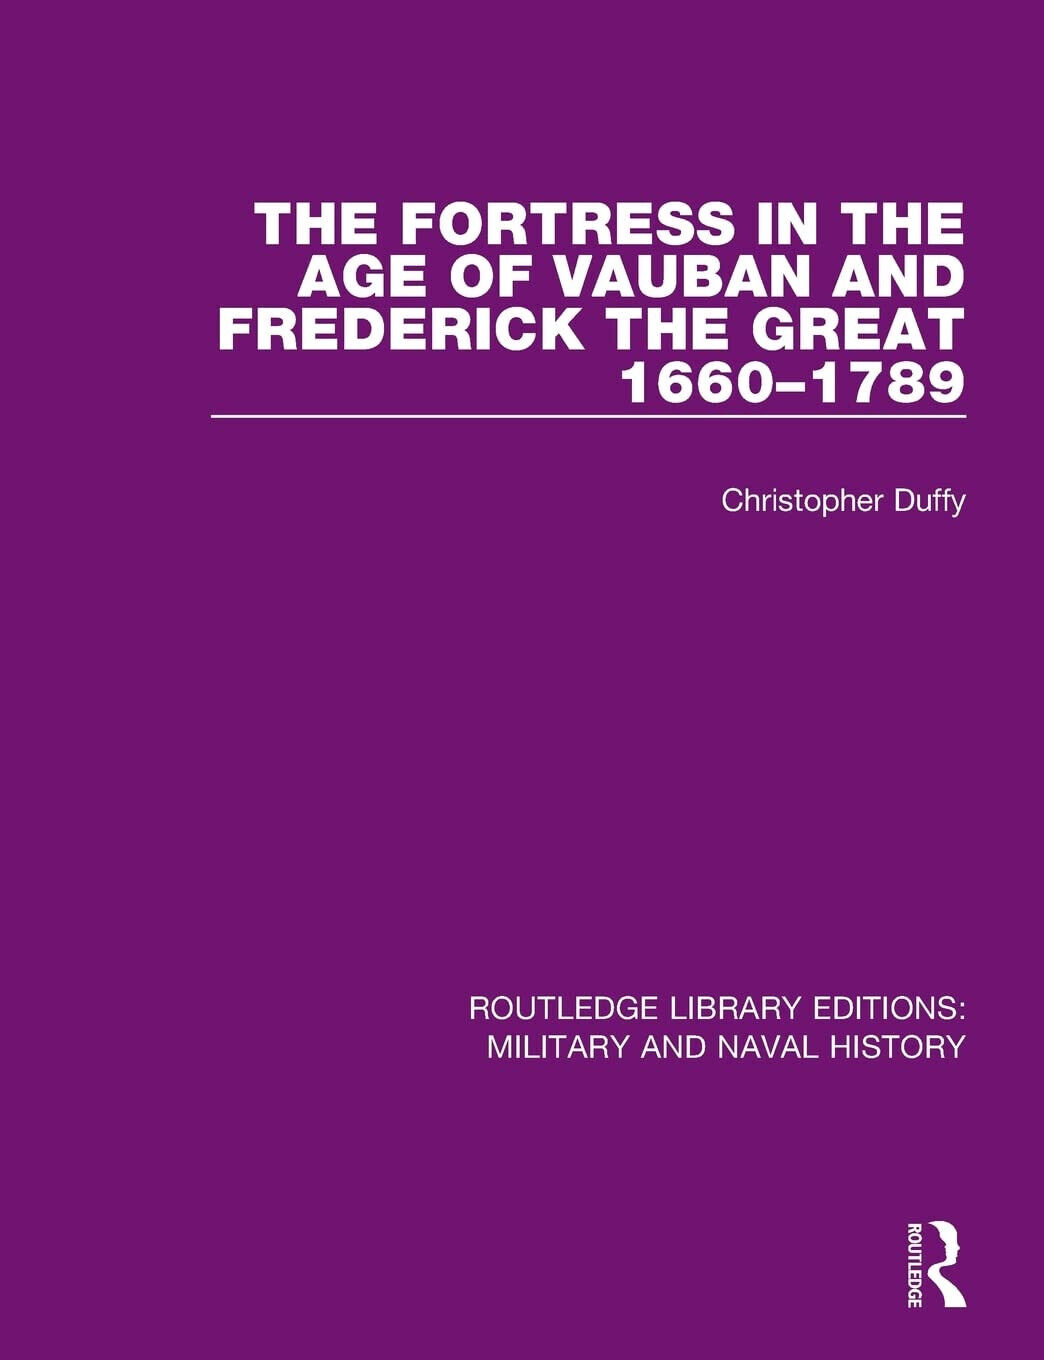 The Fortress in the Age of Vauban and Frederick the Great 1660-1789 - 2017